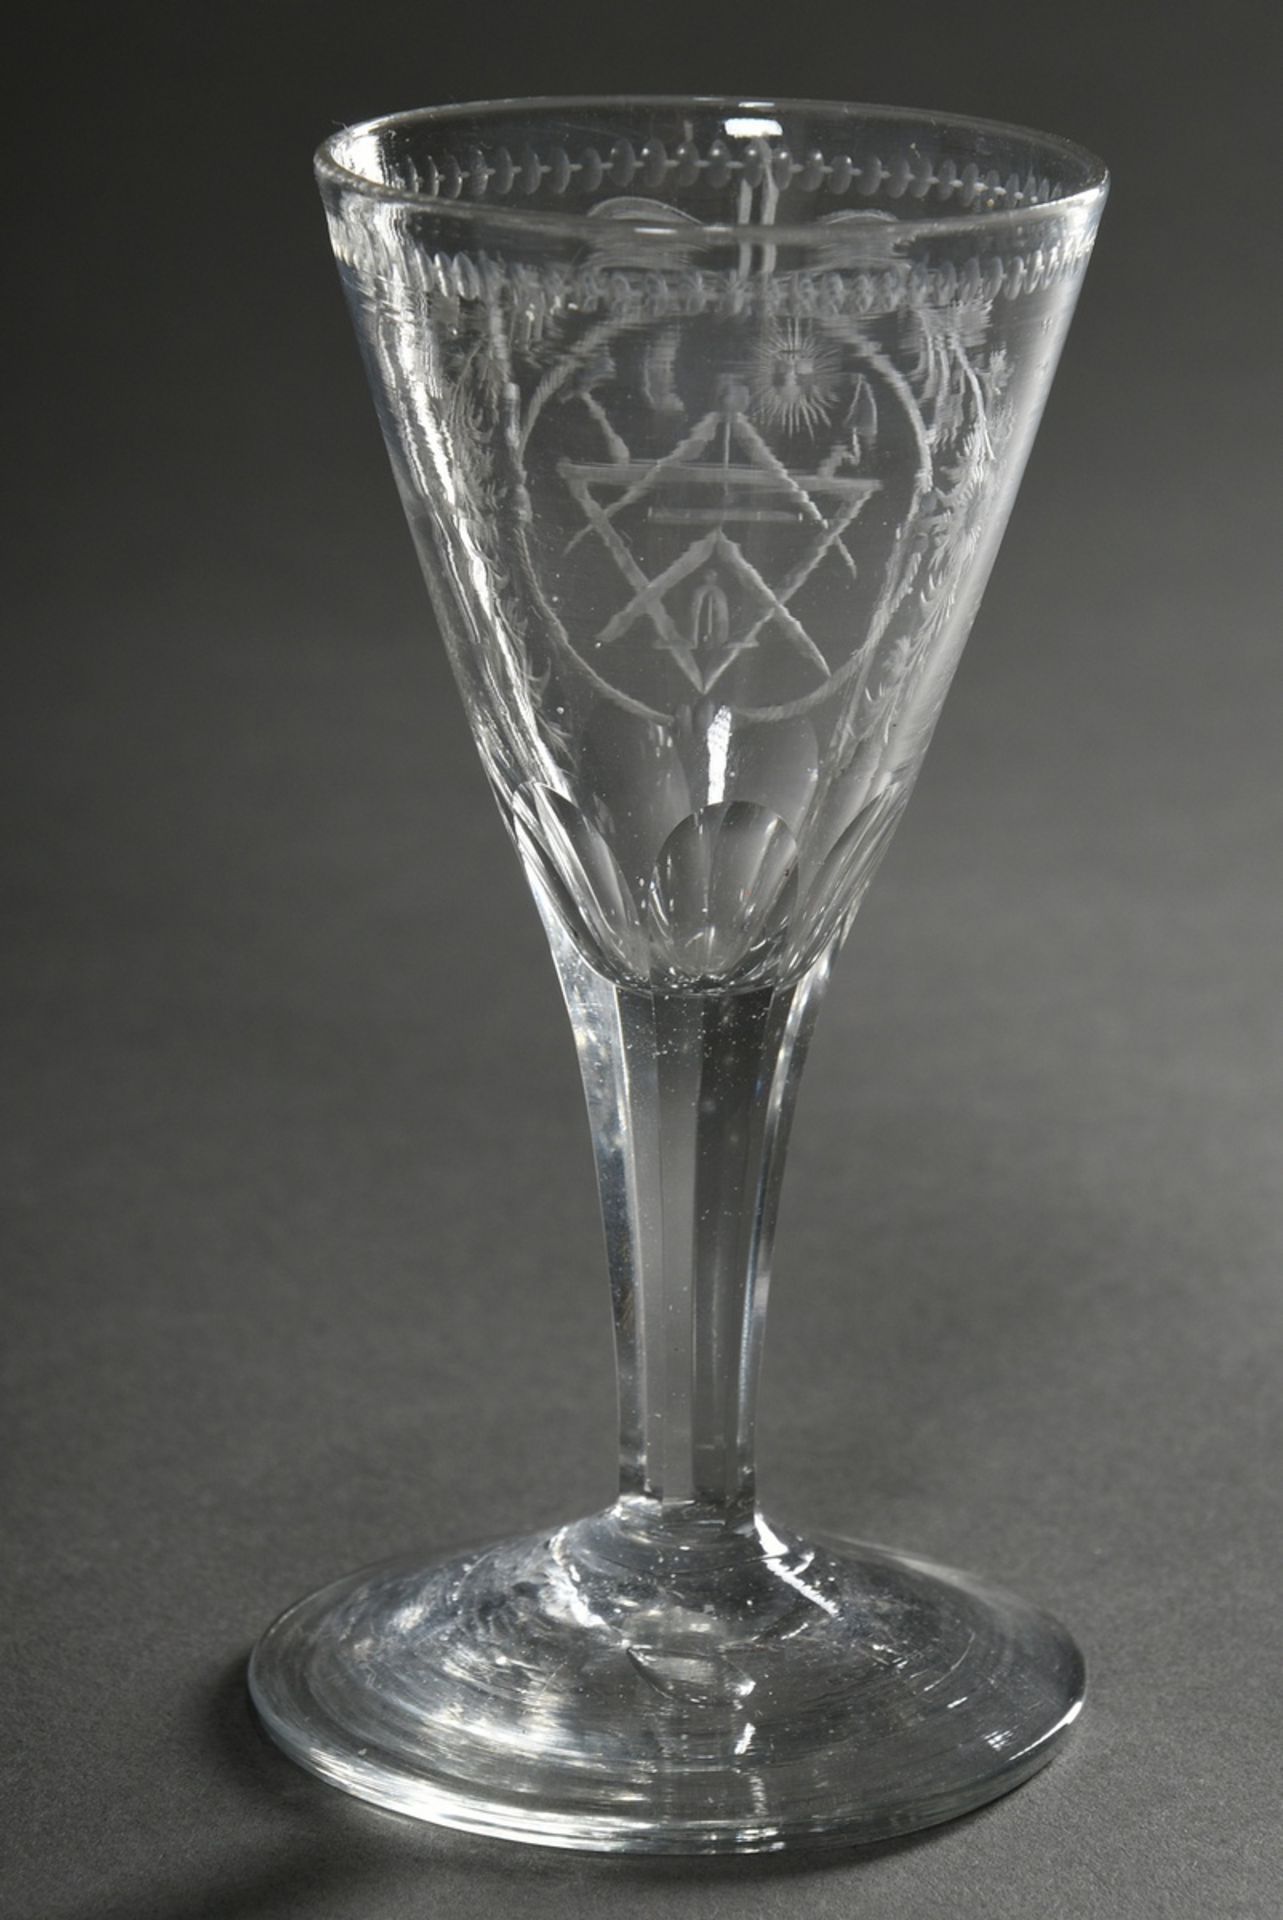 Small Masonic goblet glass with cut pearl frieze, Louis XVI medallion and symbols, 7pass cut stem o - Image 2 of 3